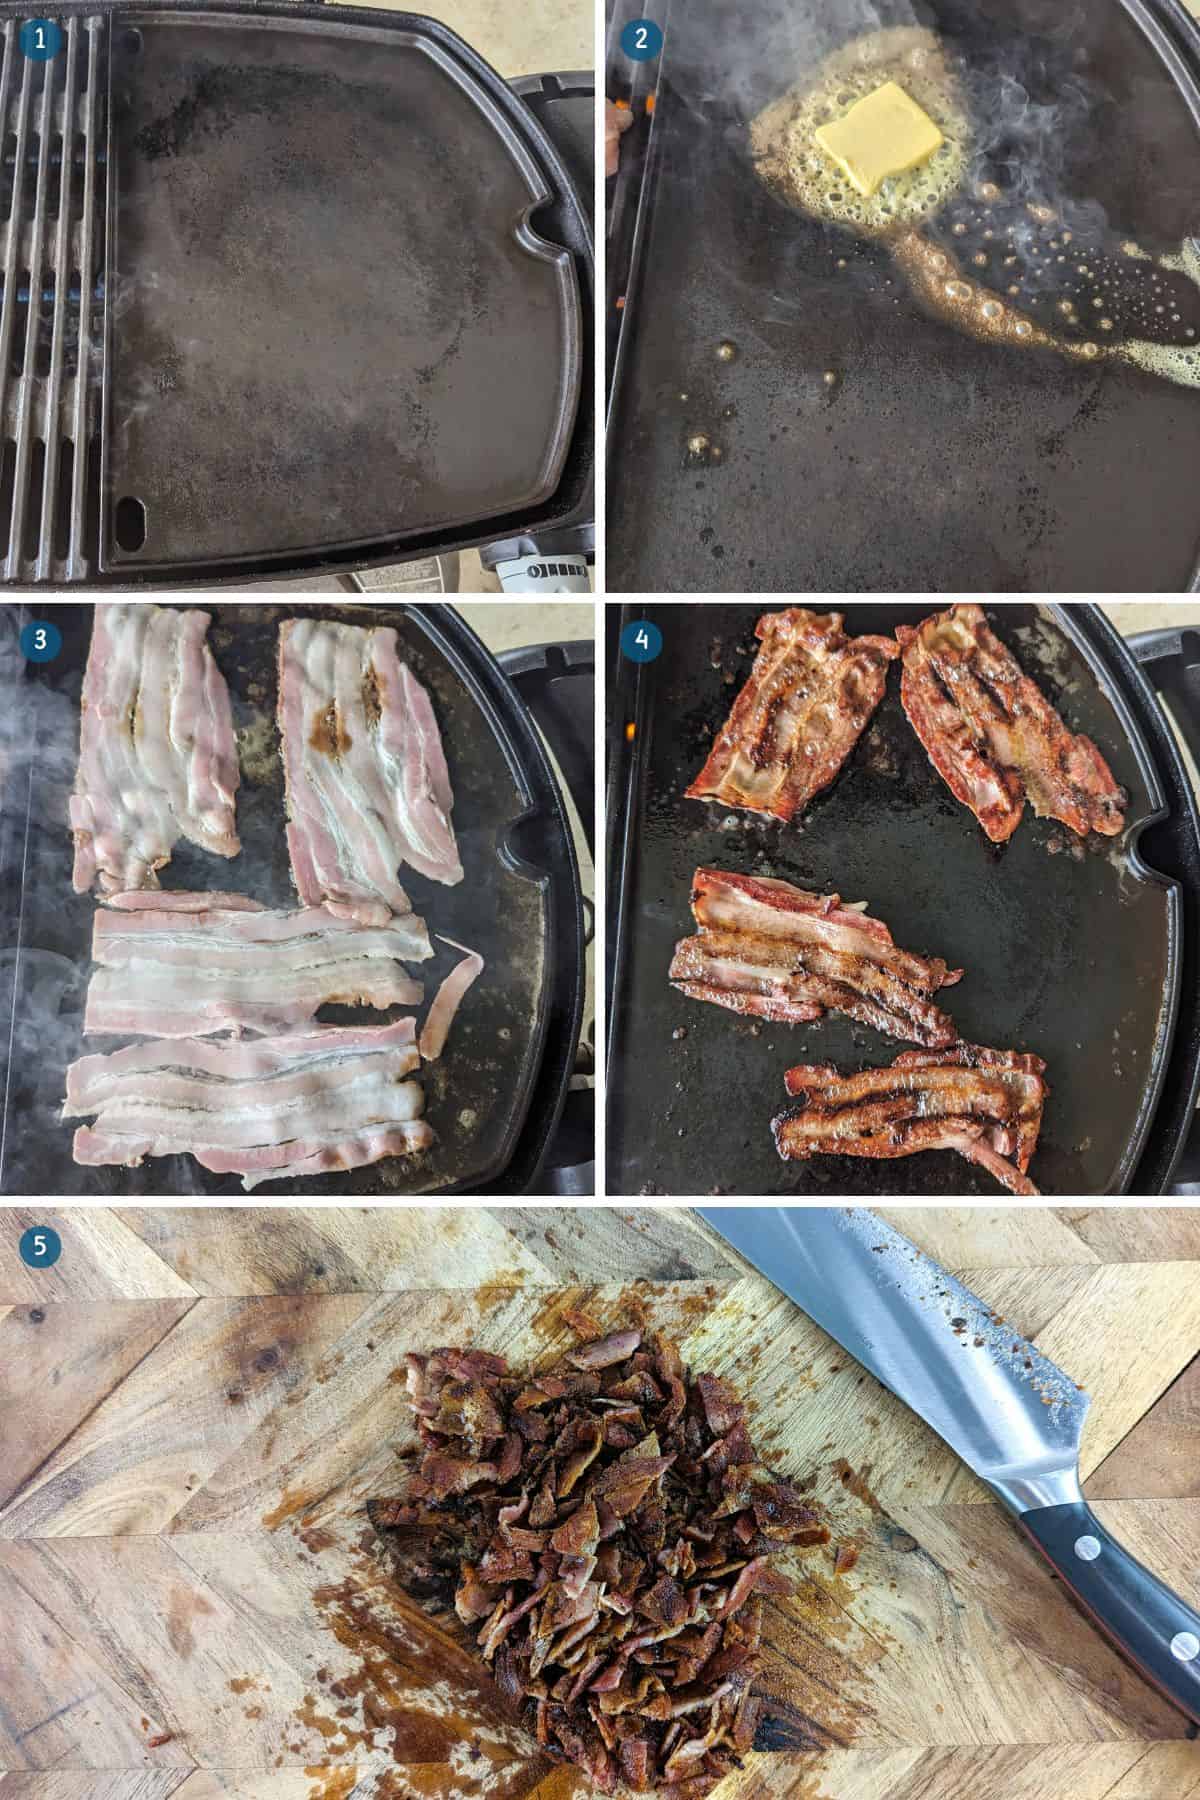 How to cook bacon on the weber q to make Weber Q Australian Fusion Chicken Enchiladas